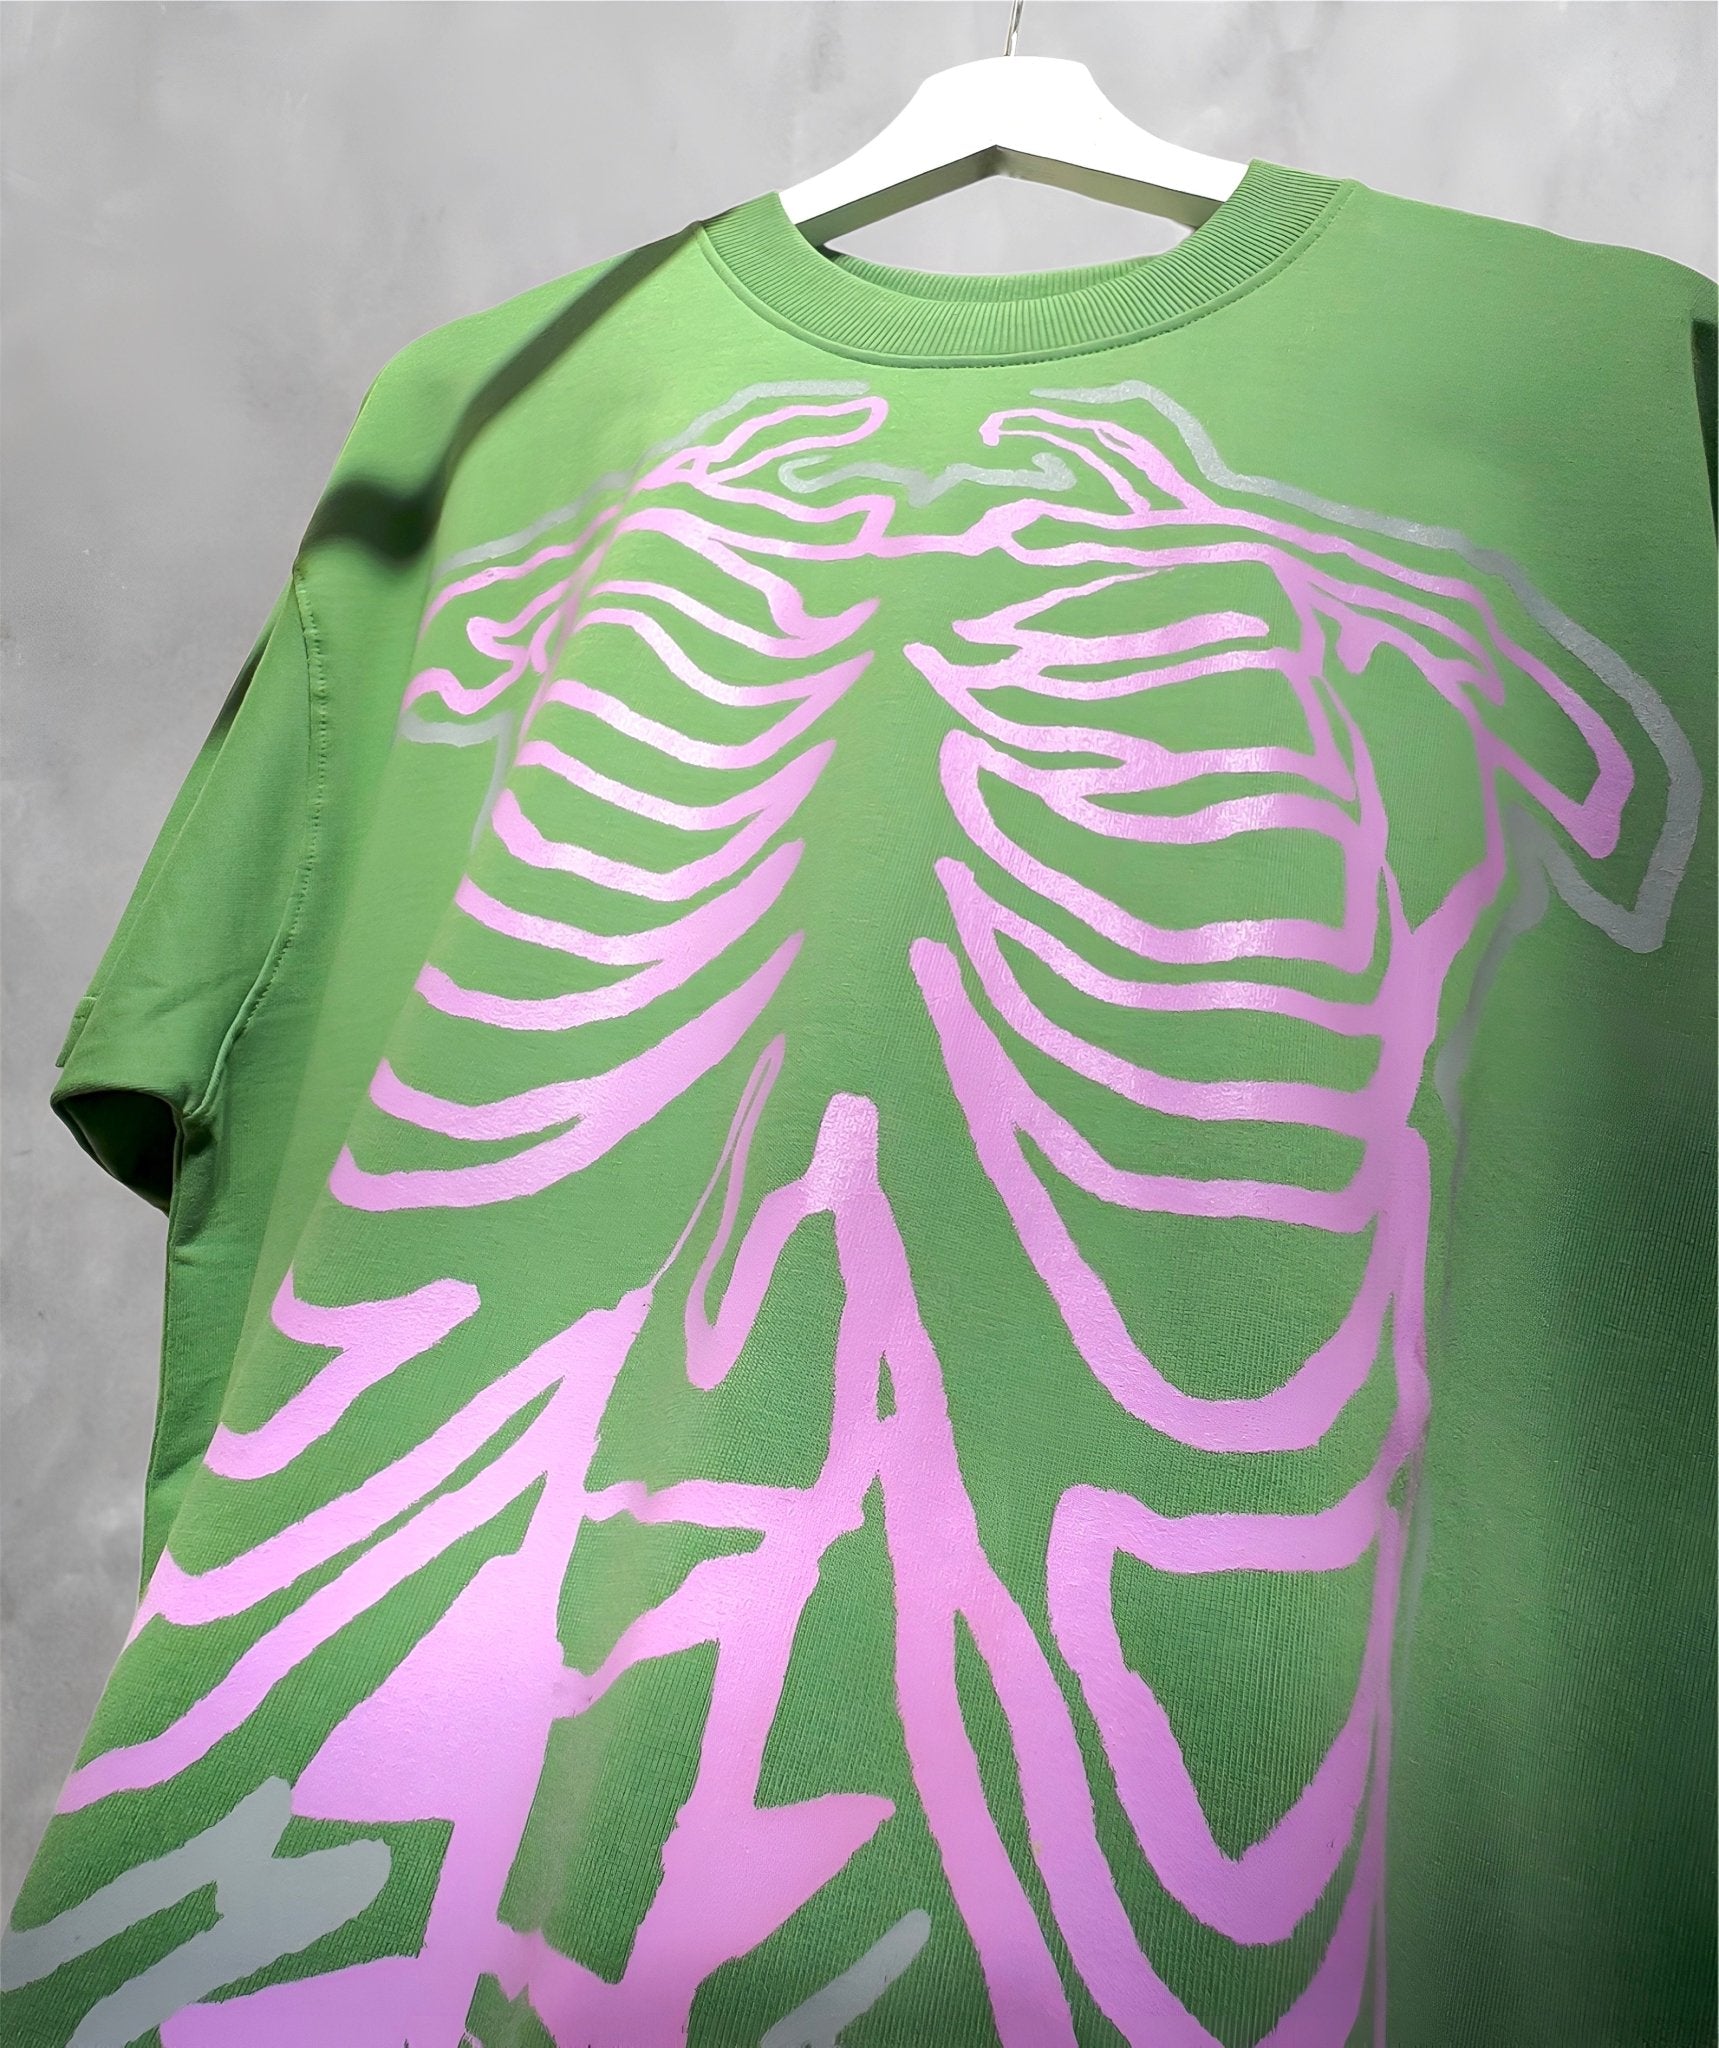 GREEN TORSO T-SHIRT (RELAXED FIT) - Psychic wear